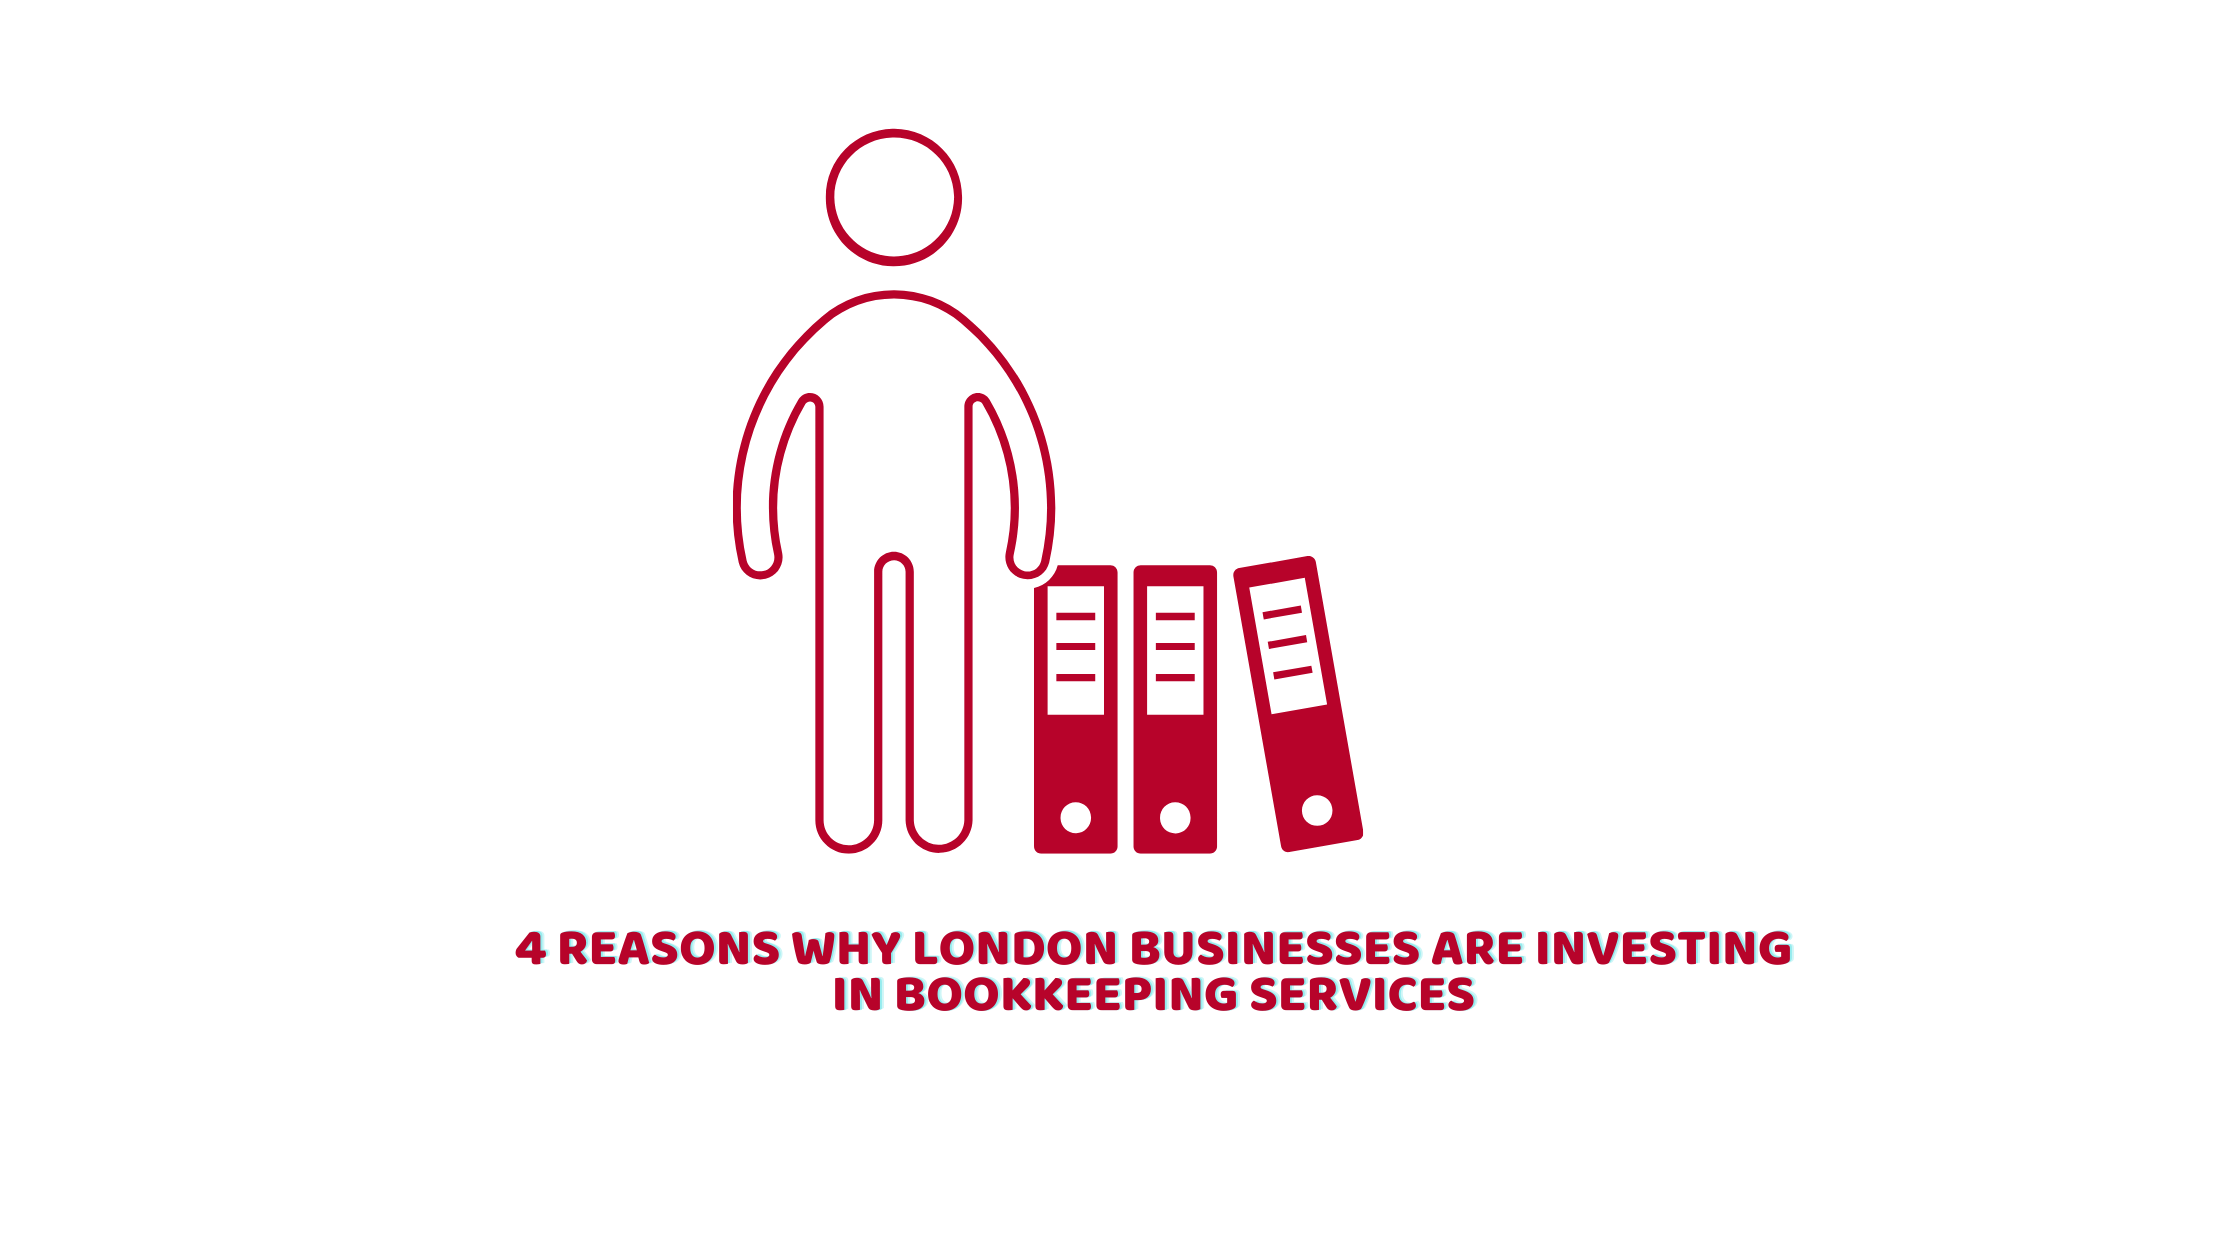 Why London Businesses Are Investing in Bookkeeping Services